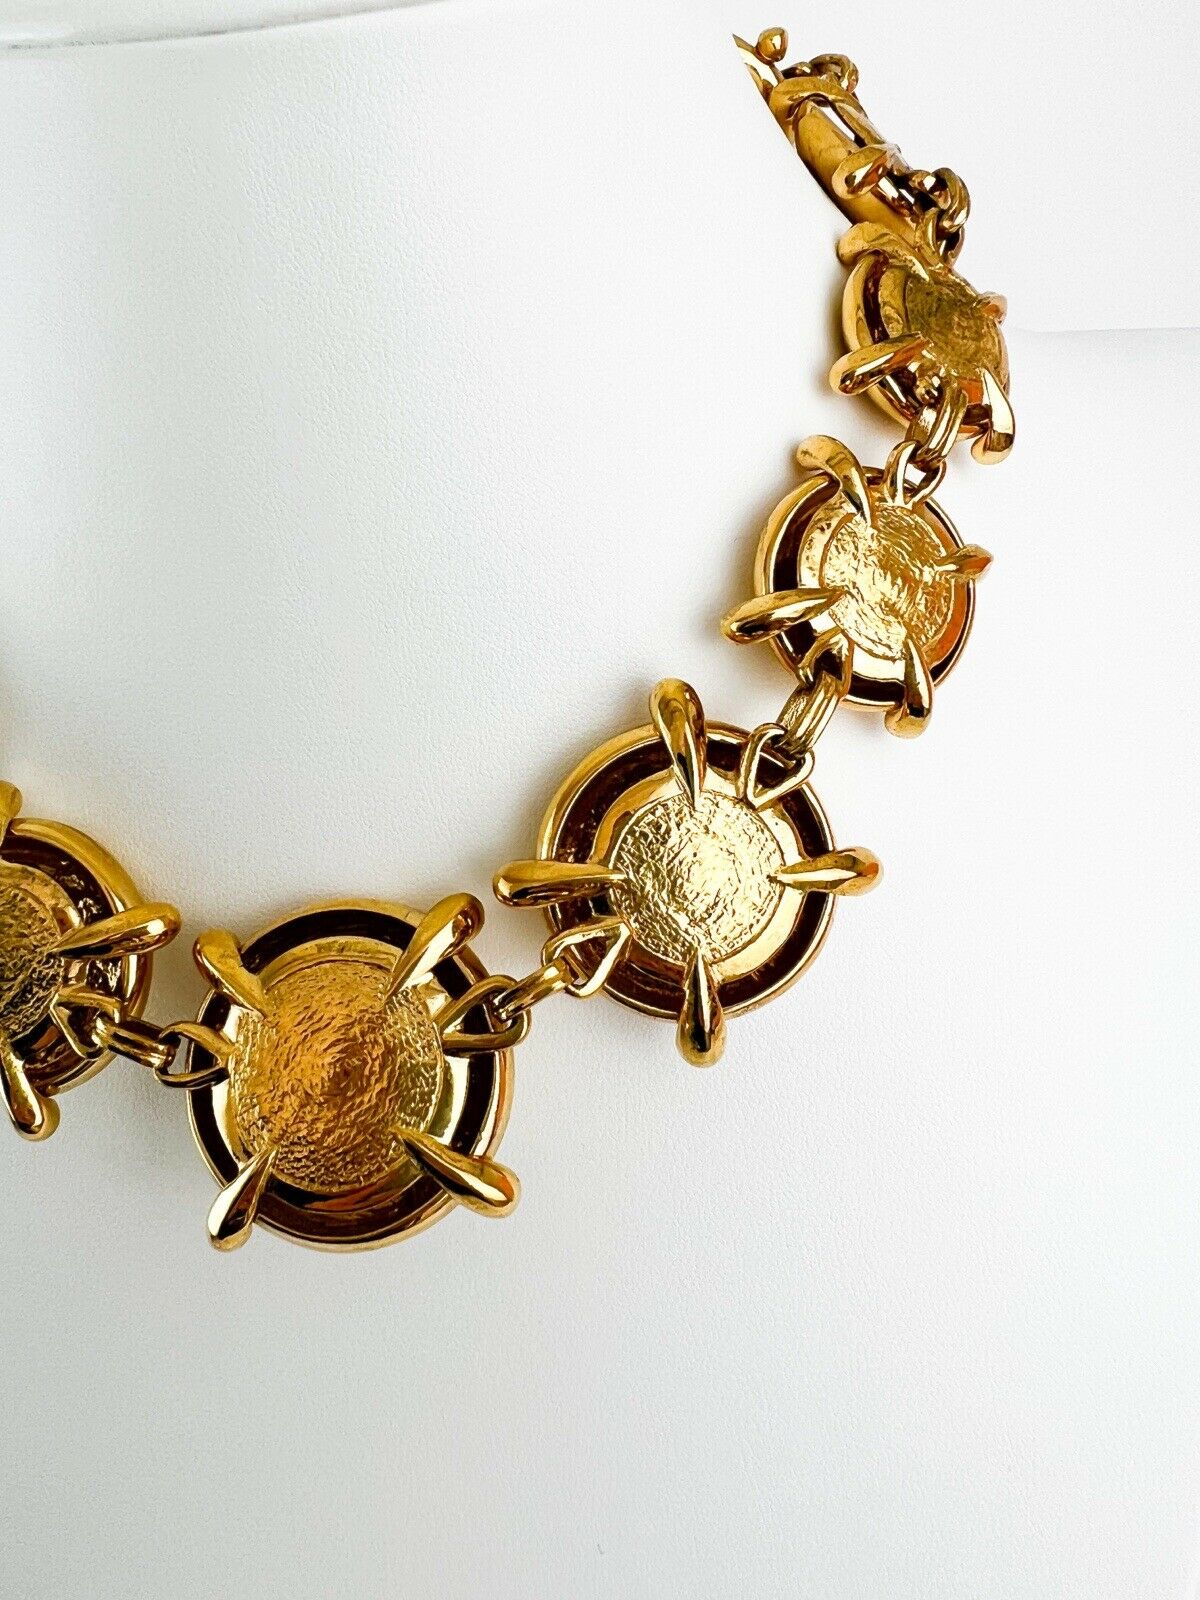 YSL Yves Saint Laurent Vintage Necklace Gold Tone Round Charm Made in France